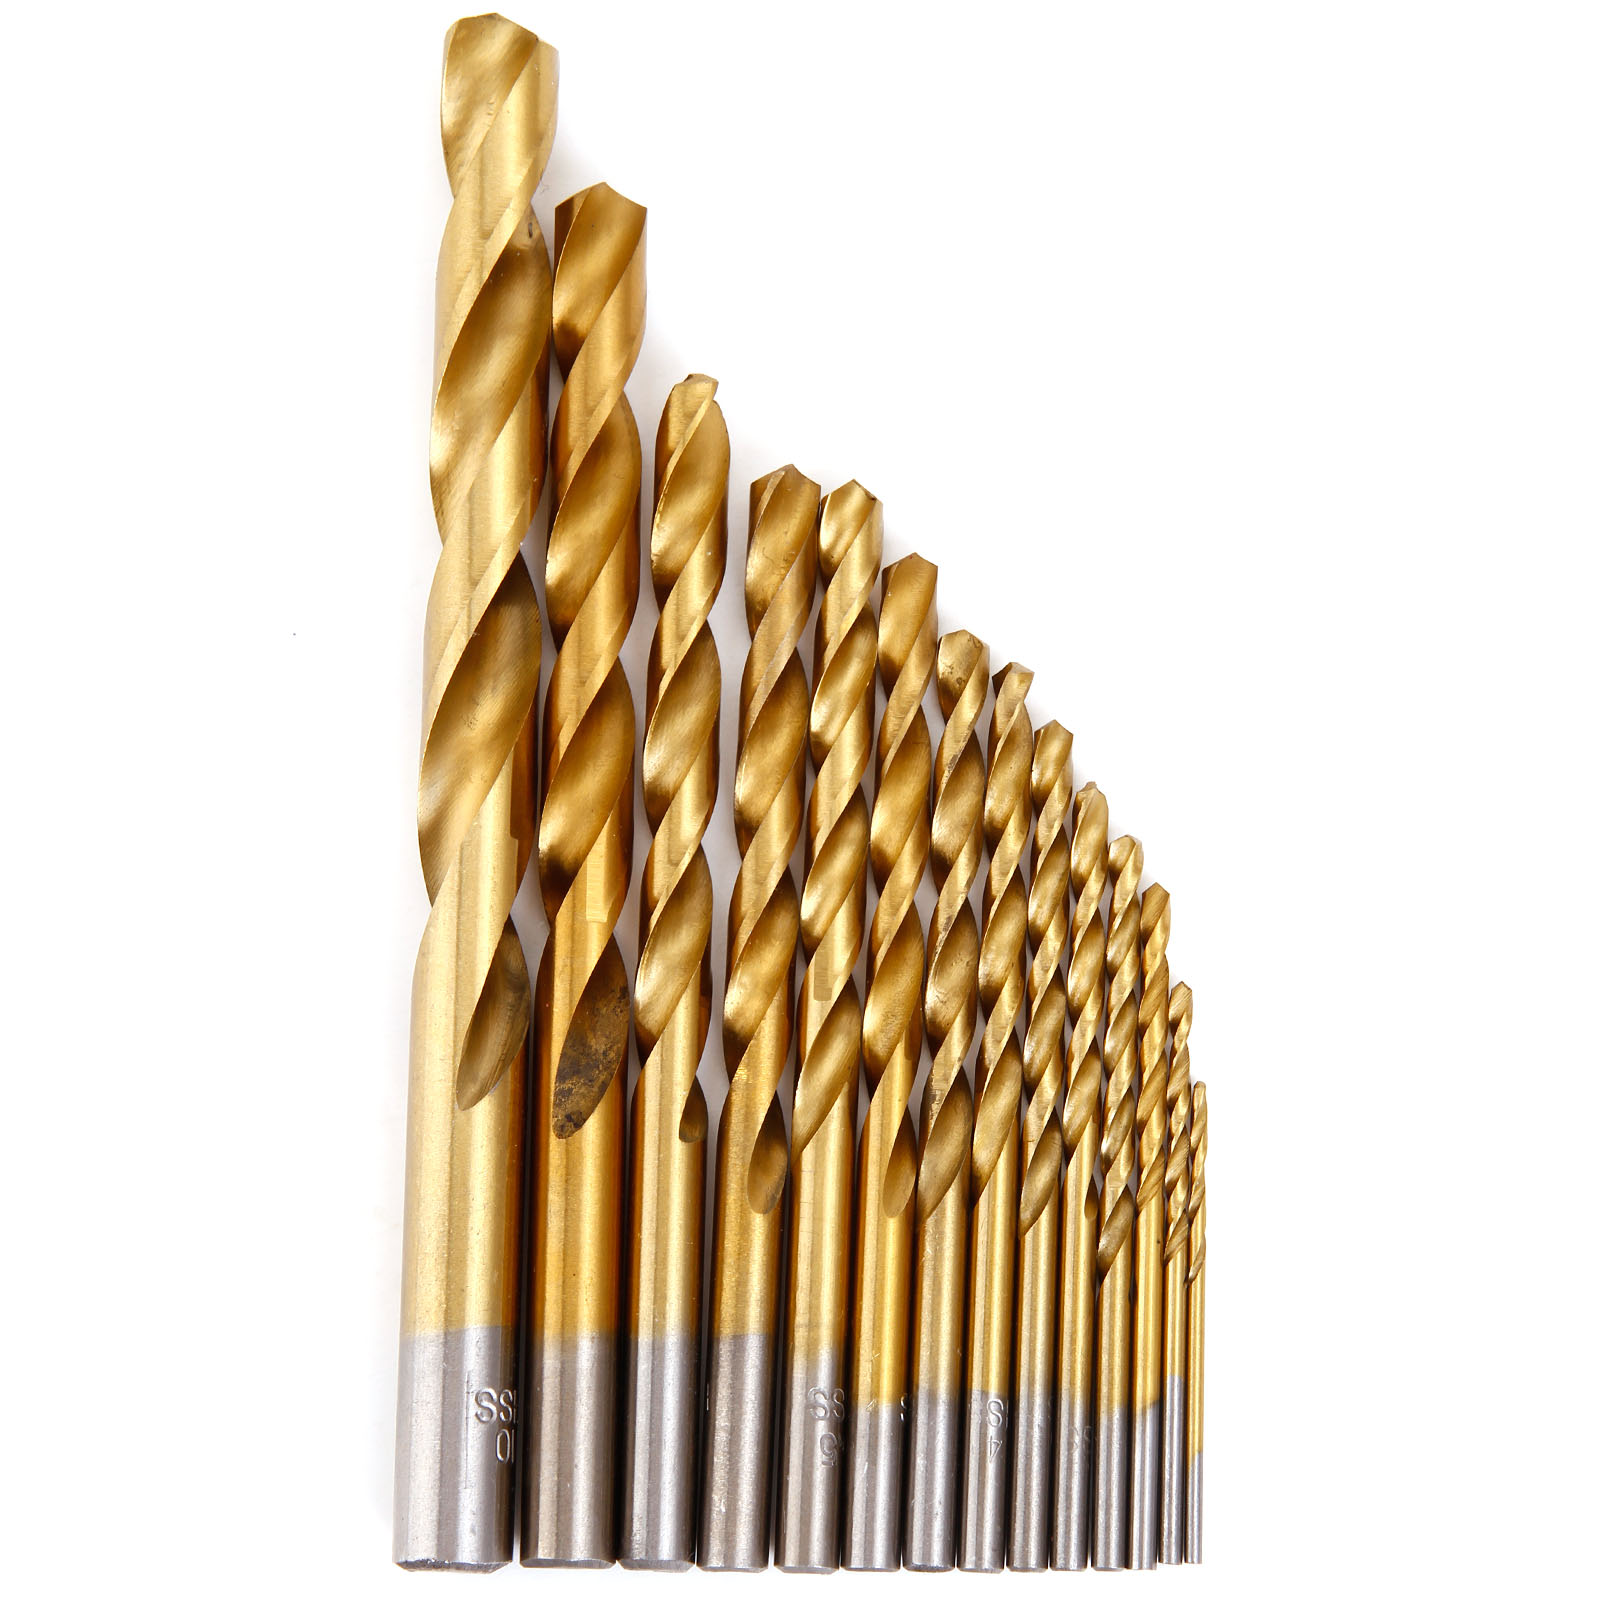 drill bits for stainless steel